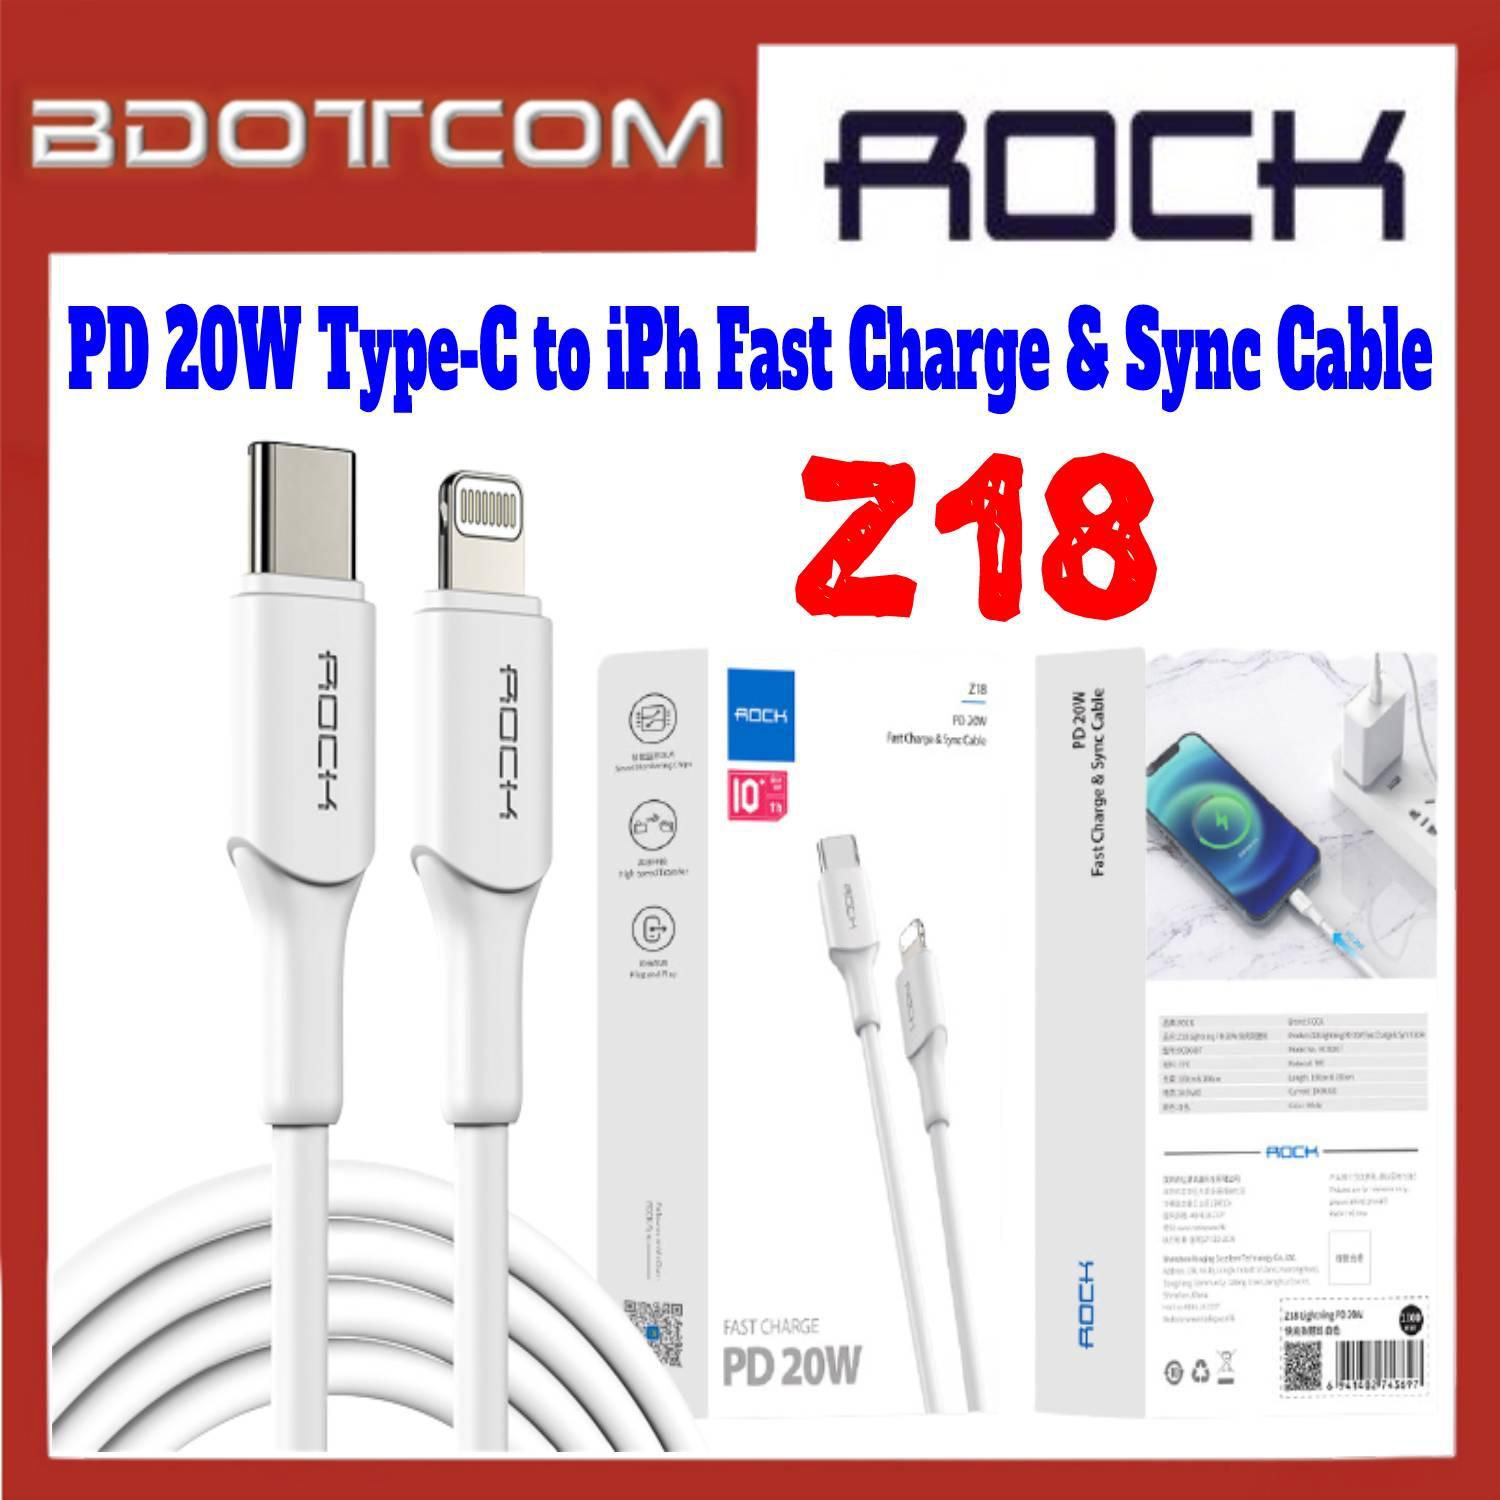 Rock Z18 PD 20W Type-C to Lightning Fast Charge & Sync Cable for iPh 11 Pro Max